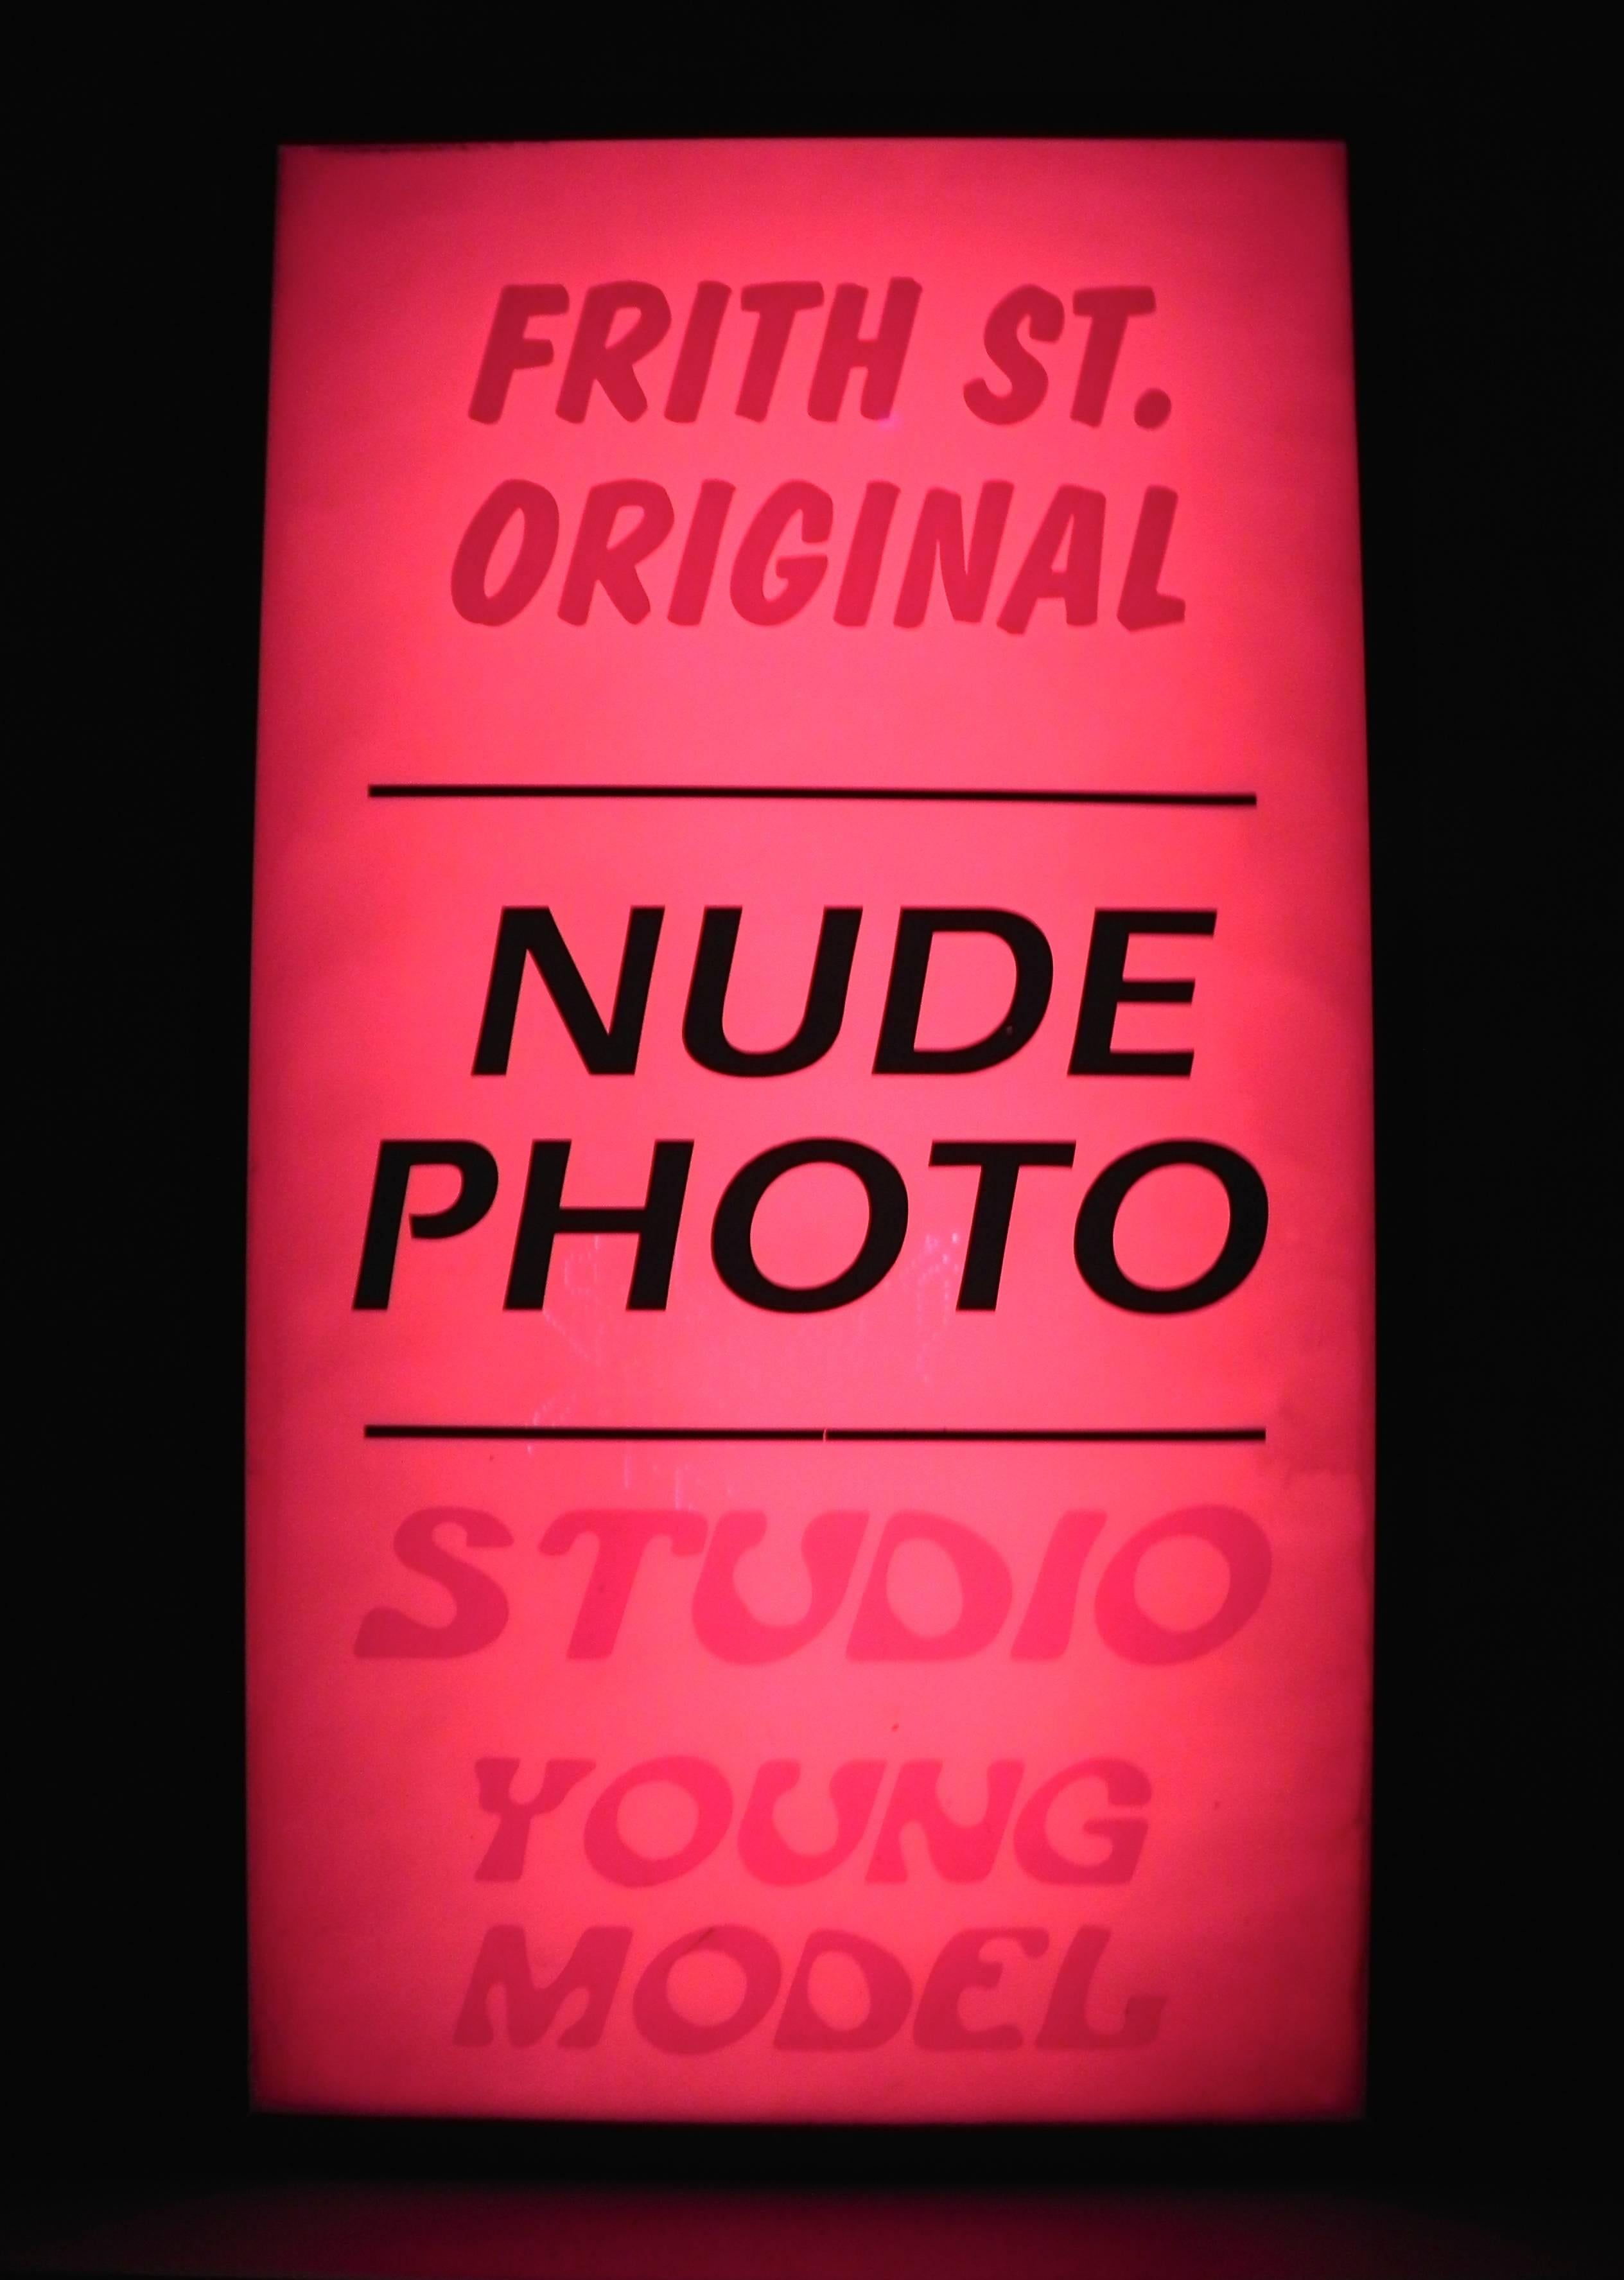 God's Own Junkyard Soho Lightbox - "Frith St. Original"

240v 13A UK power.

Ready to plug in and use.